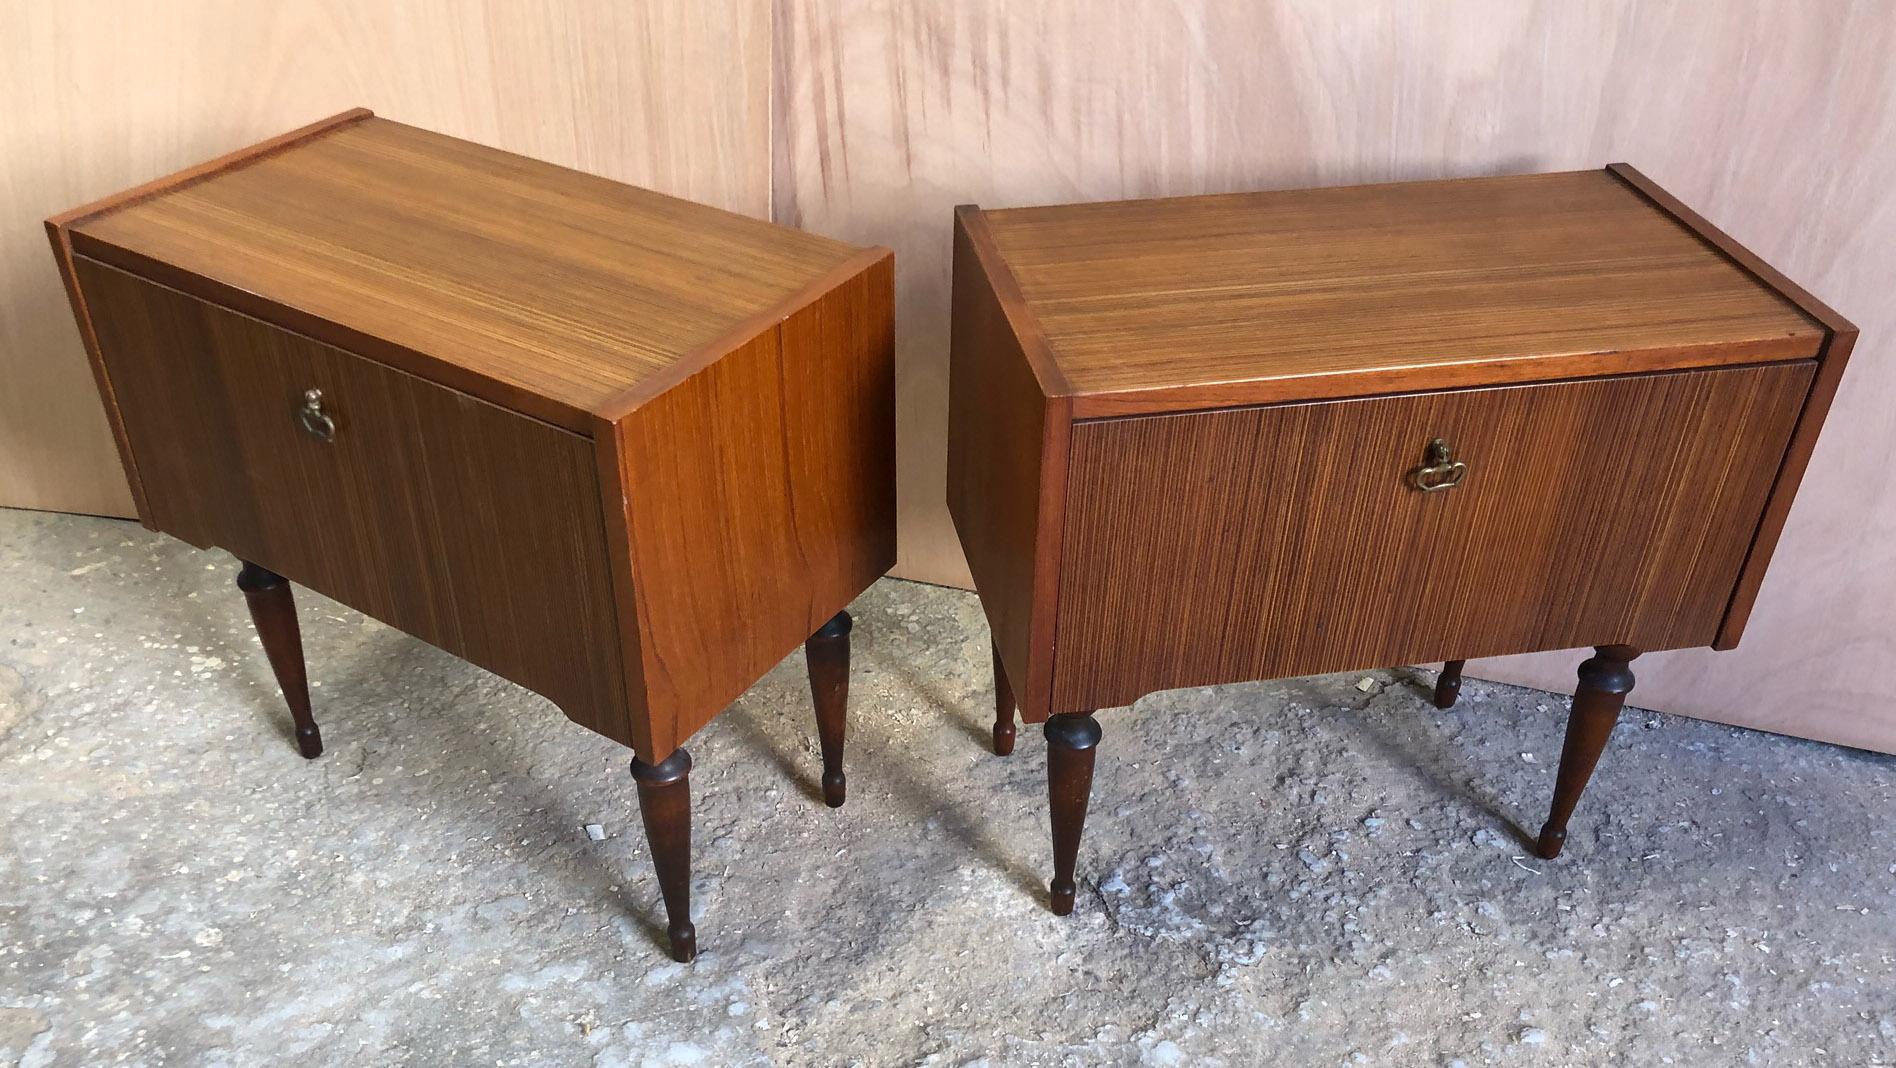 Pair of Bedside Tables from 1970, Italian, Teak Honey Color In Good Condition For Sale In Buggiano, IT